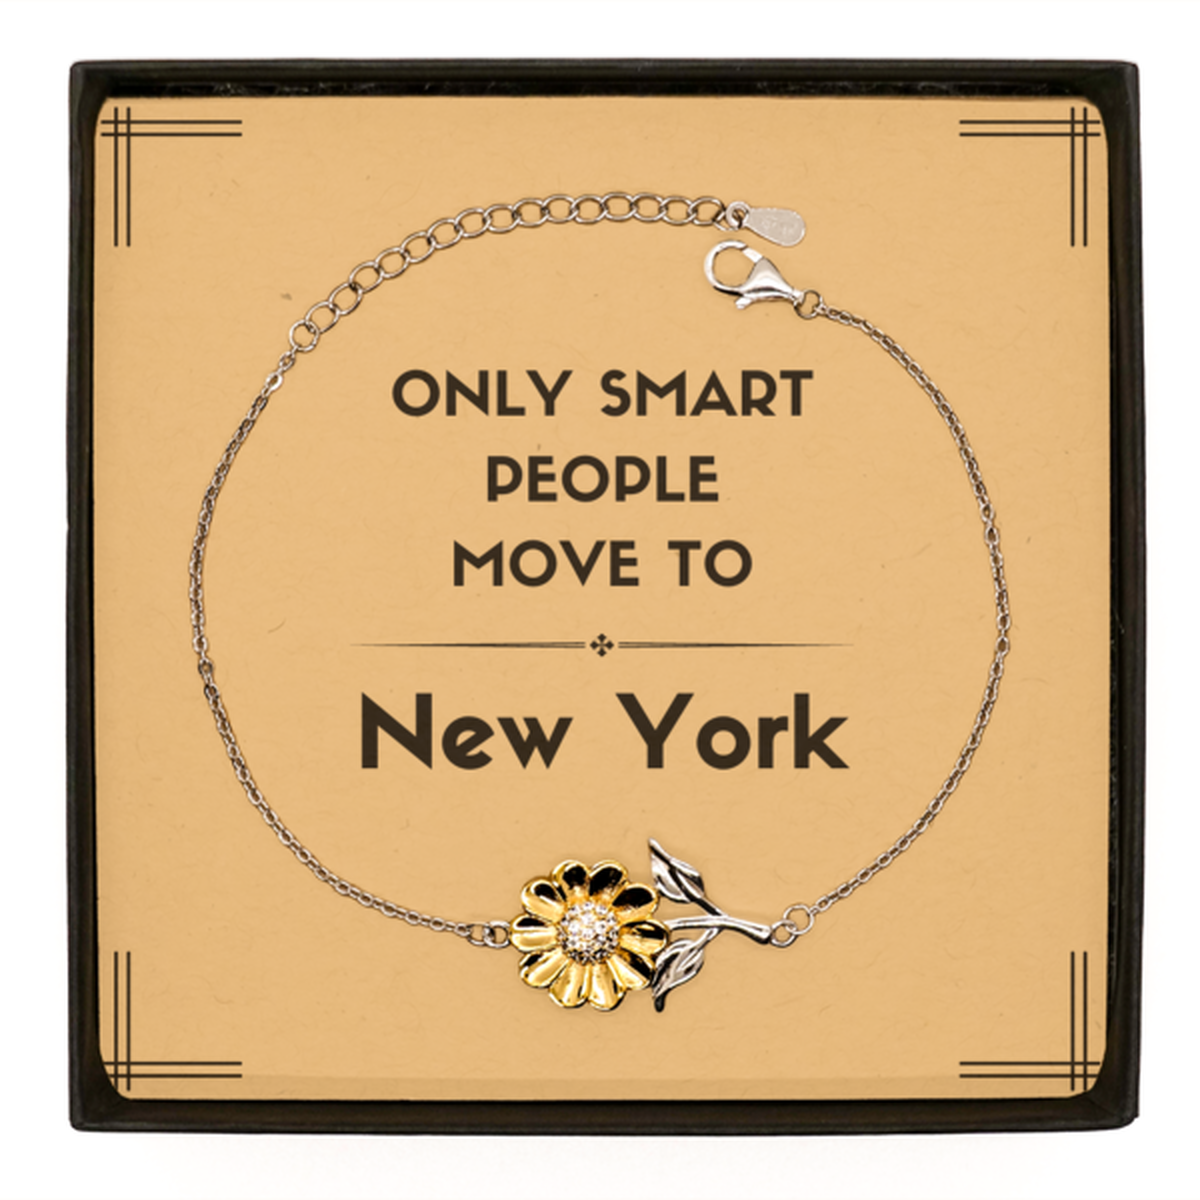 Only smart people move to New York Sunflower Bracelet, Message Card Gifts For New York, Move to New York Gifts for Friends Coworker Funny Saying Quote